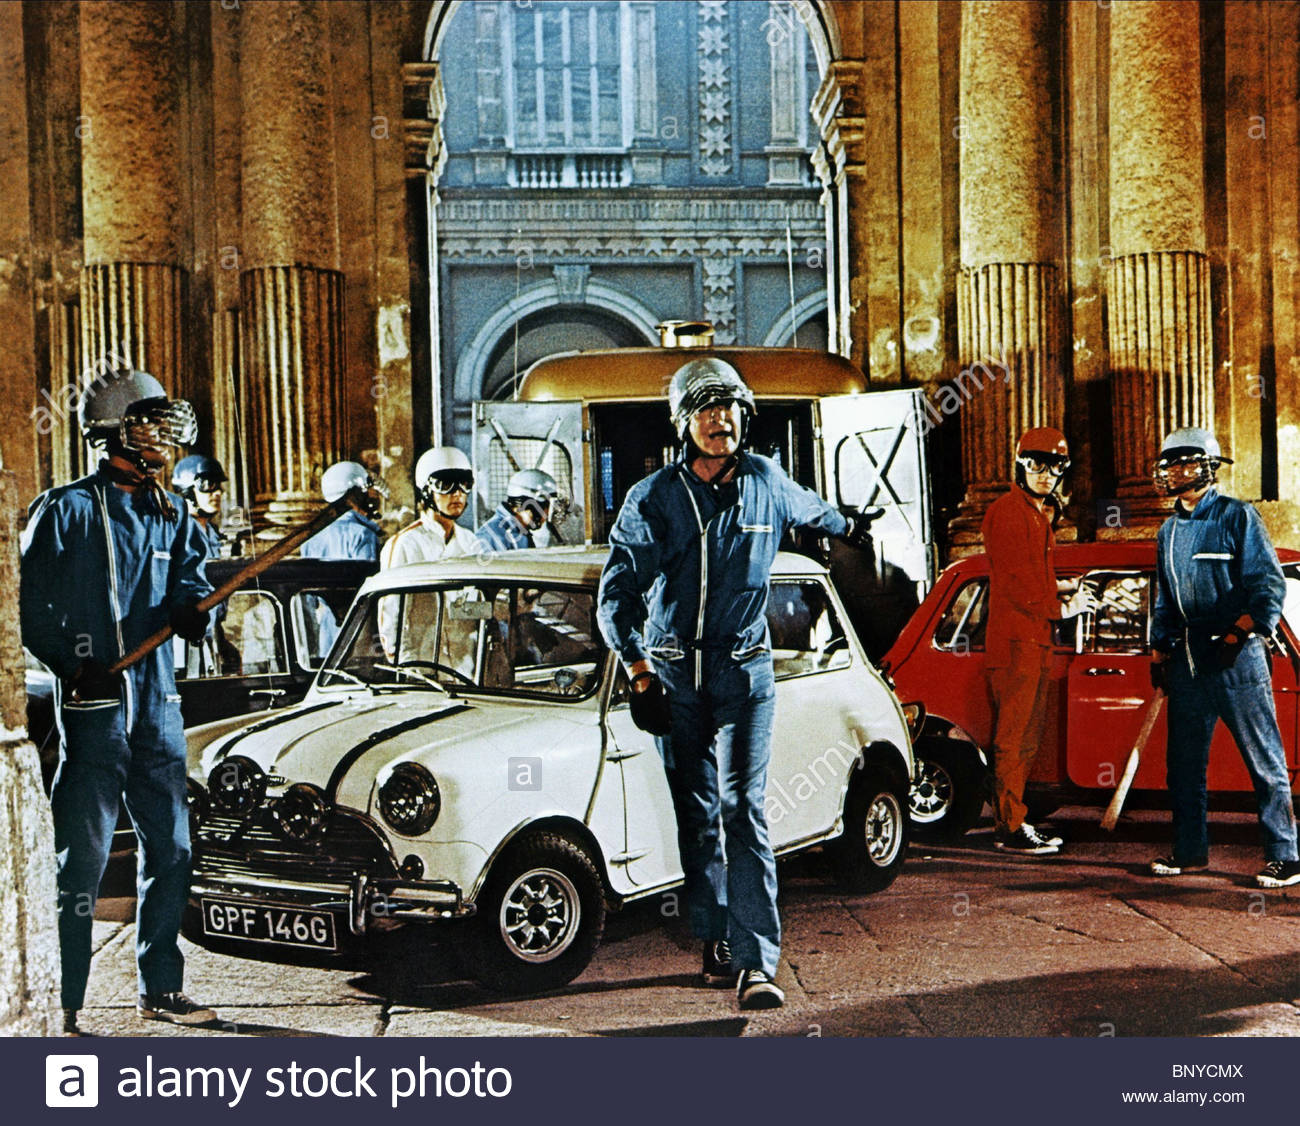 Nice Images Collection: The Italian Job (1969) Desktop Wallpapers